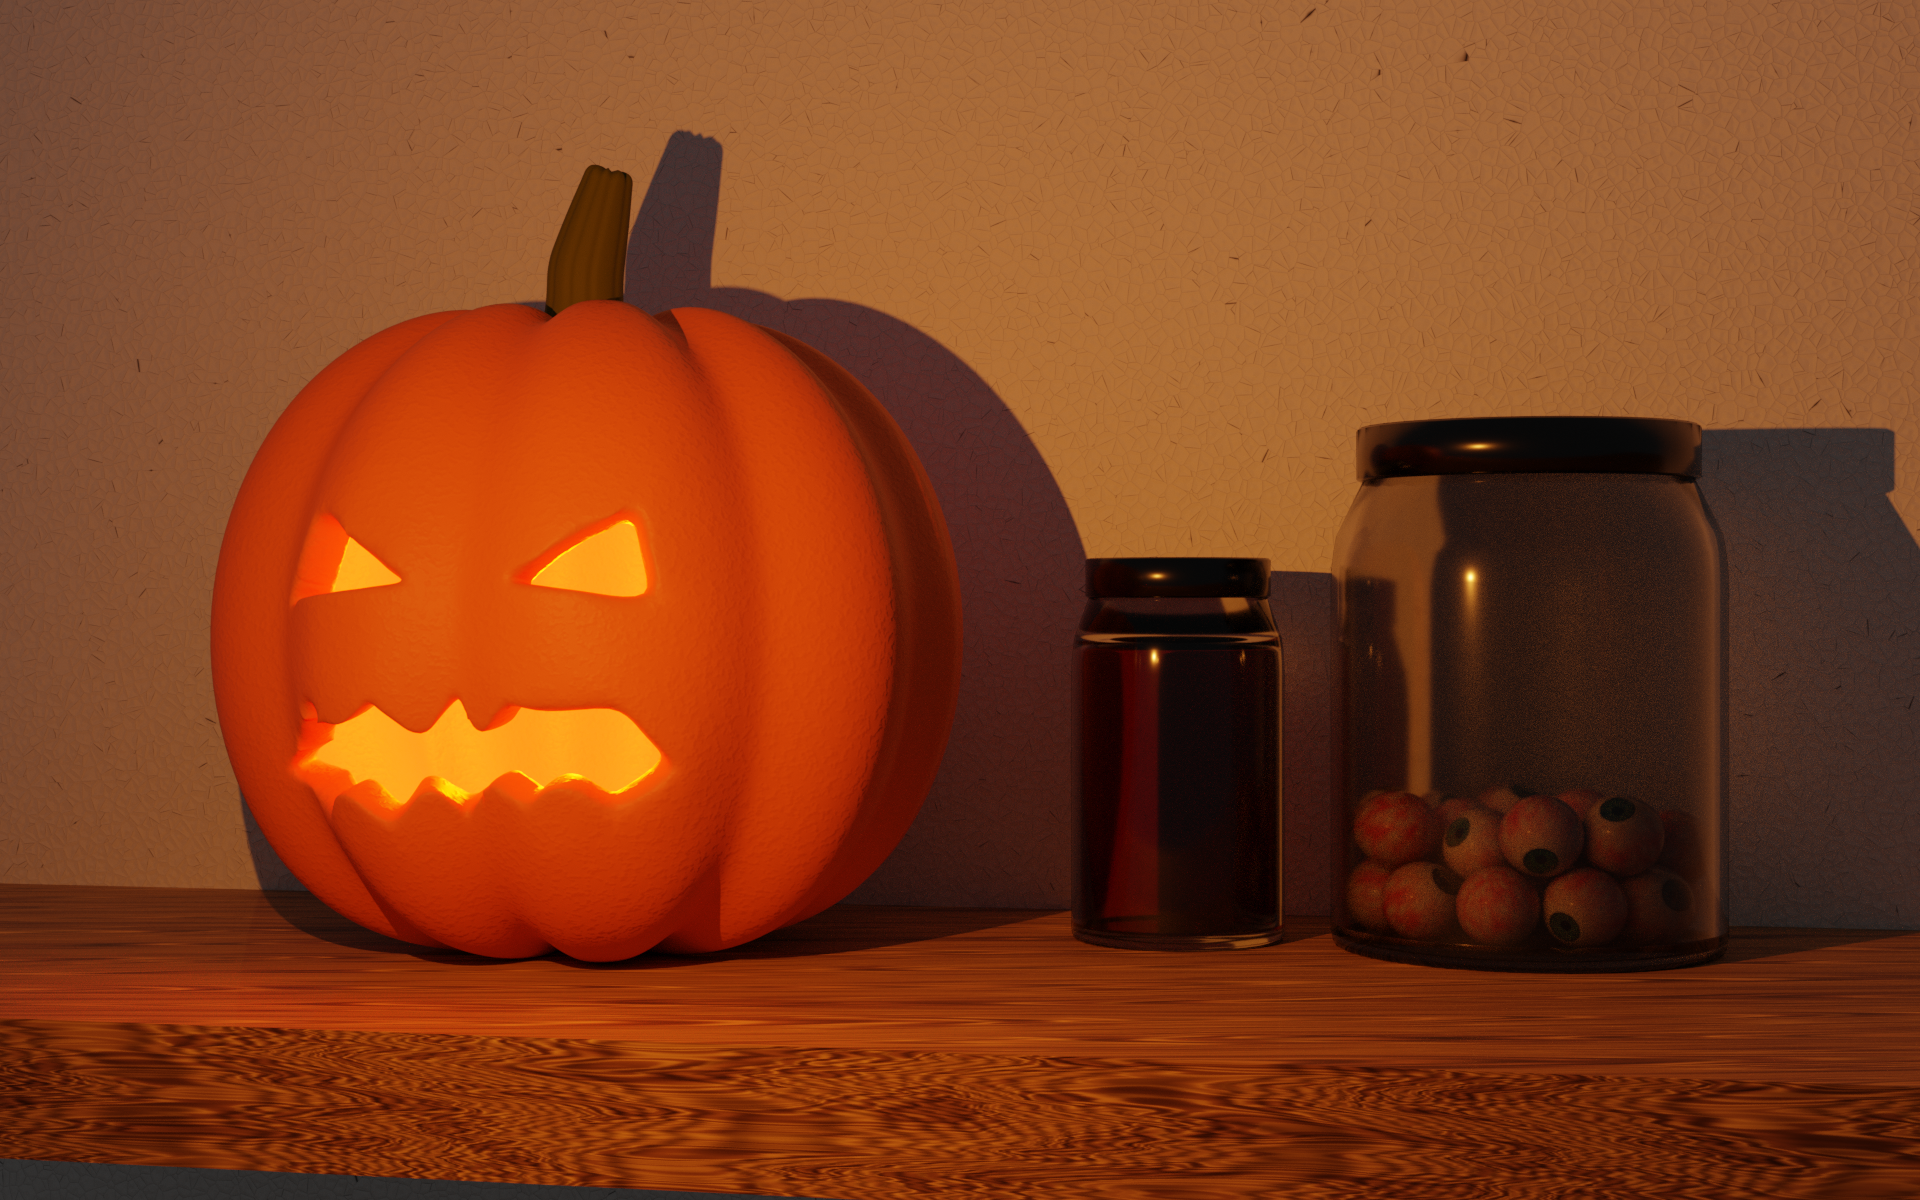 A scene for the halloween’s holiday by Le Geek Du Clavier